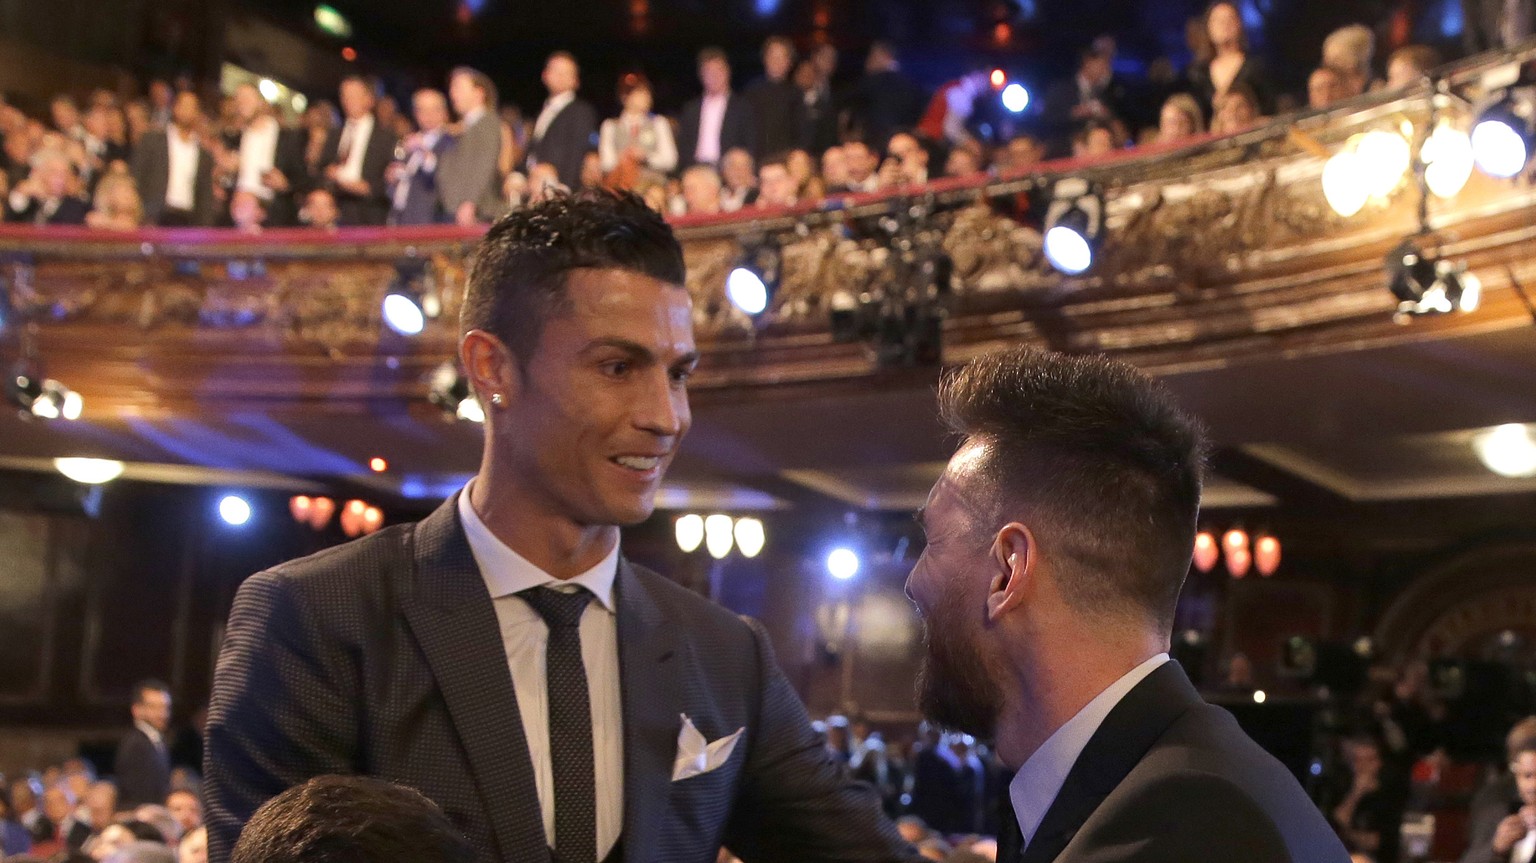 Portuguese soccer player Ronaldo, left, shakes hands wit Argentinian soccer player Lionel Messi during the The Best FIFA 2017 Awards at the Palladium Theatre in London, Monday, Oct. 23, 2017. (AP Phot ...